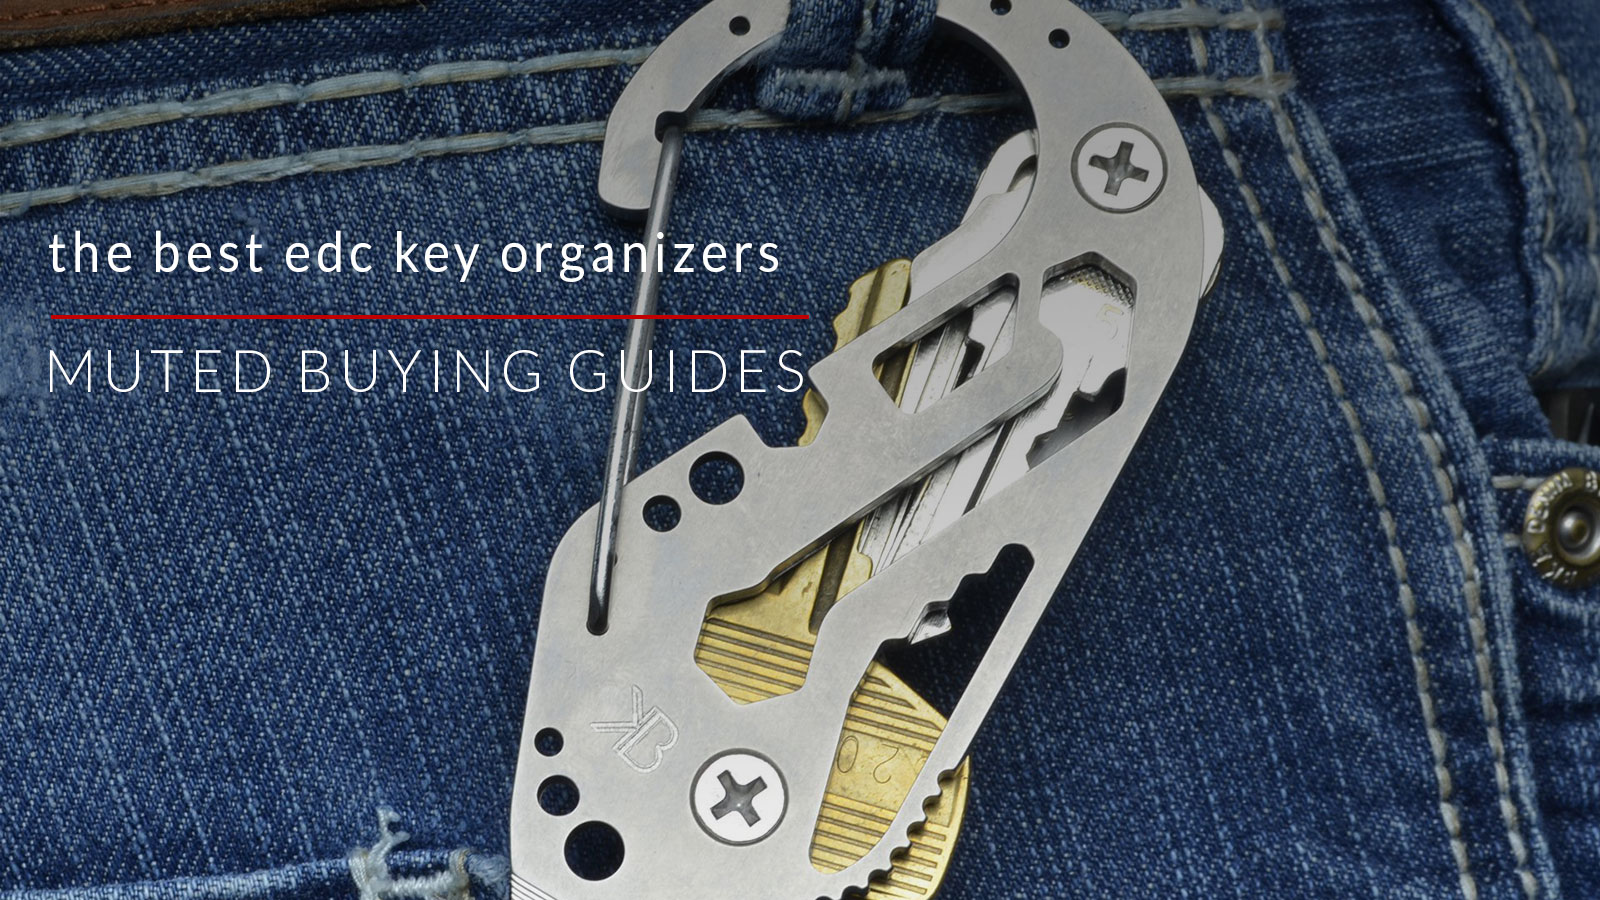 The Best Everyday Carry Key Organizers